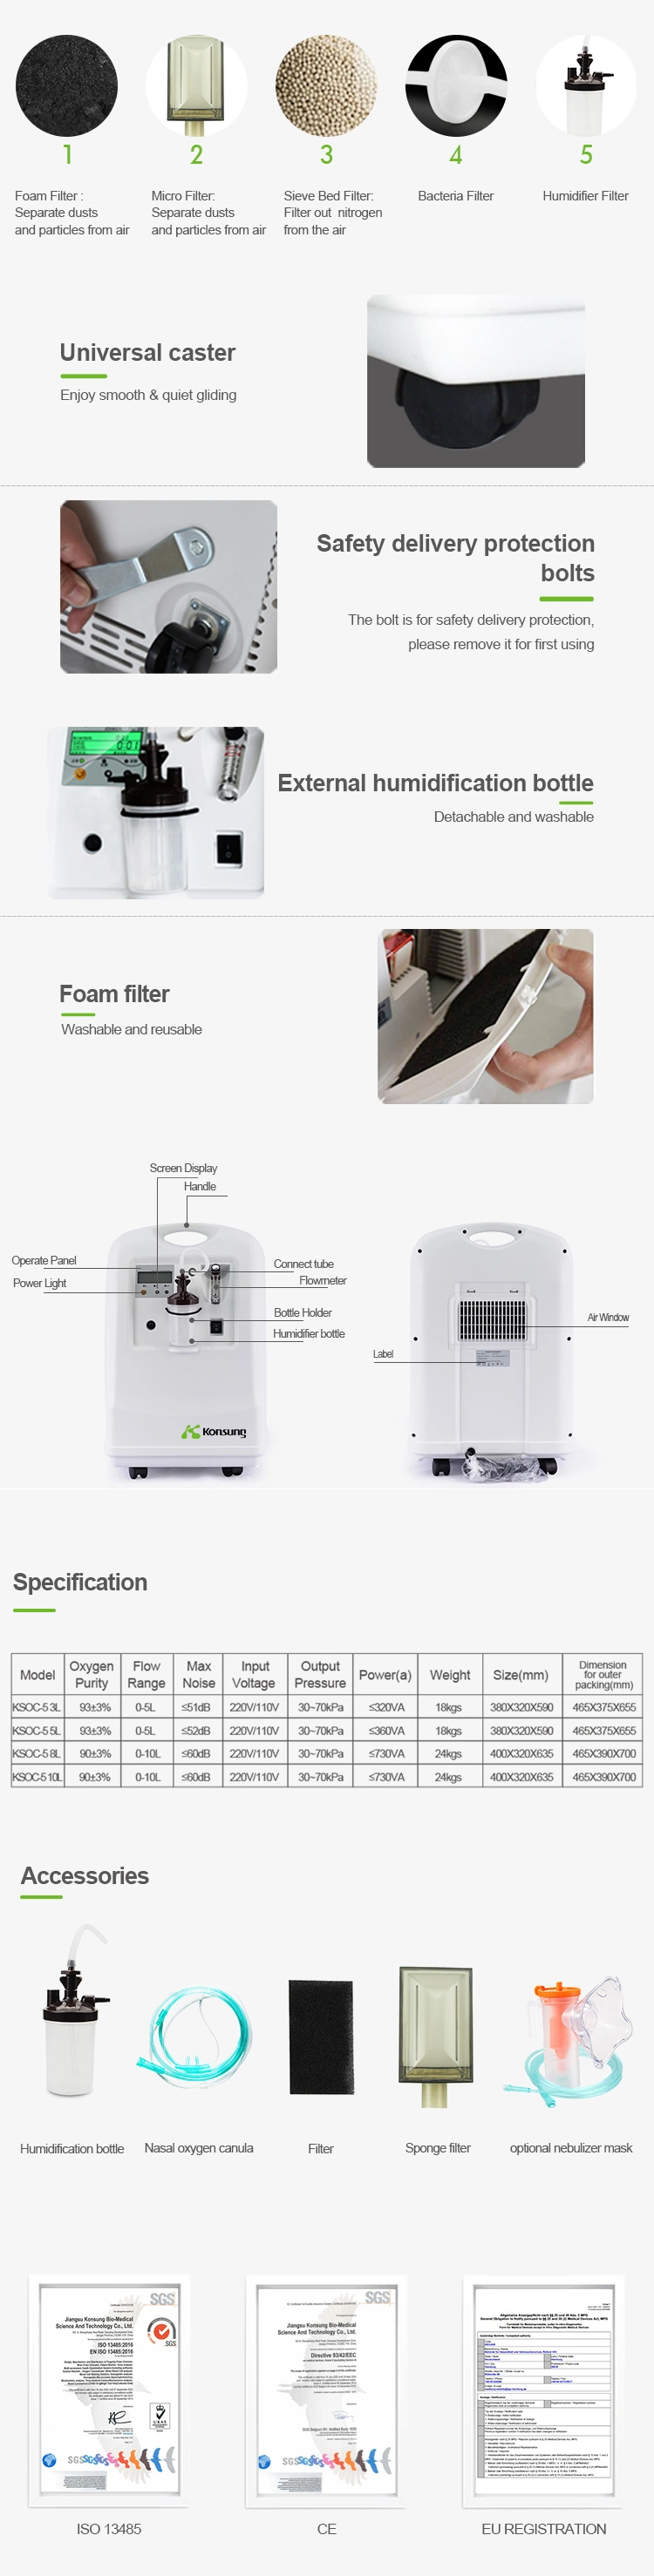 Ksoc-10 CE Konsung Hfnc 10 Liter Medical Oxygen Concentrator with Abnormal Alarm for Physical Therapy (KSOC-3, 5, 8, 10)